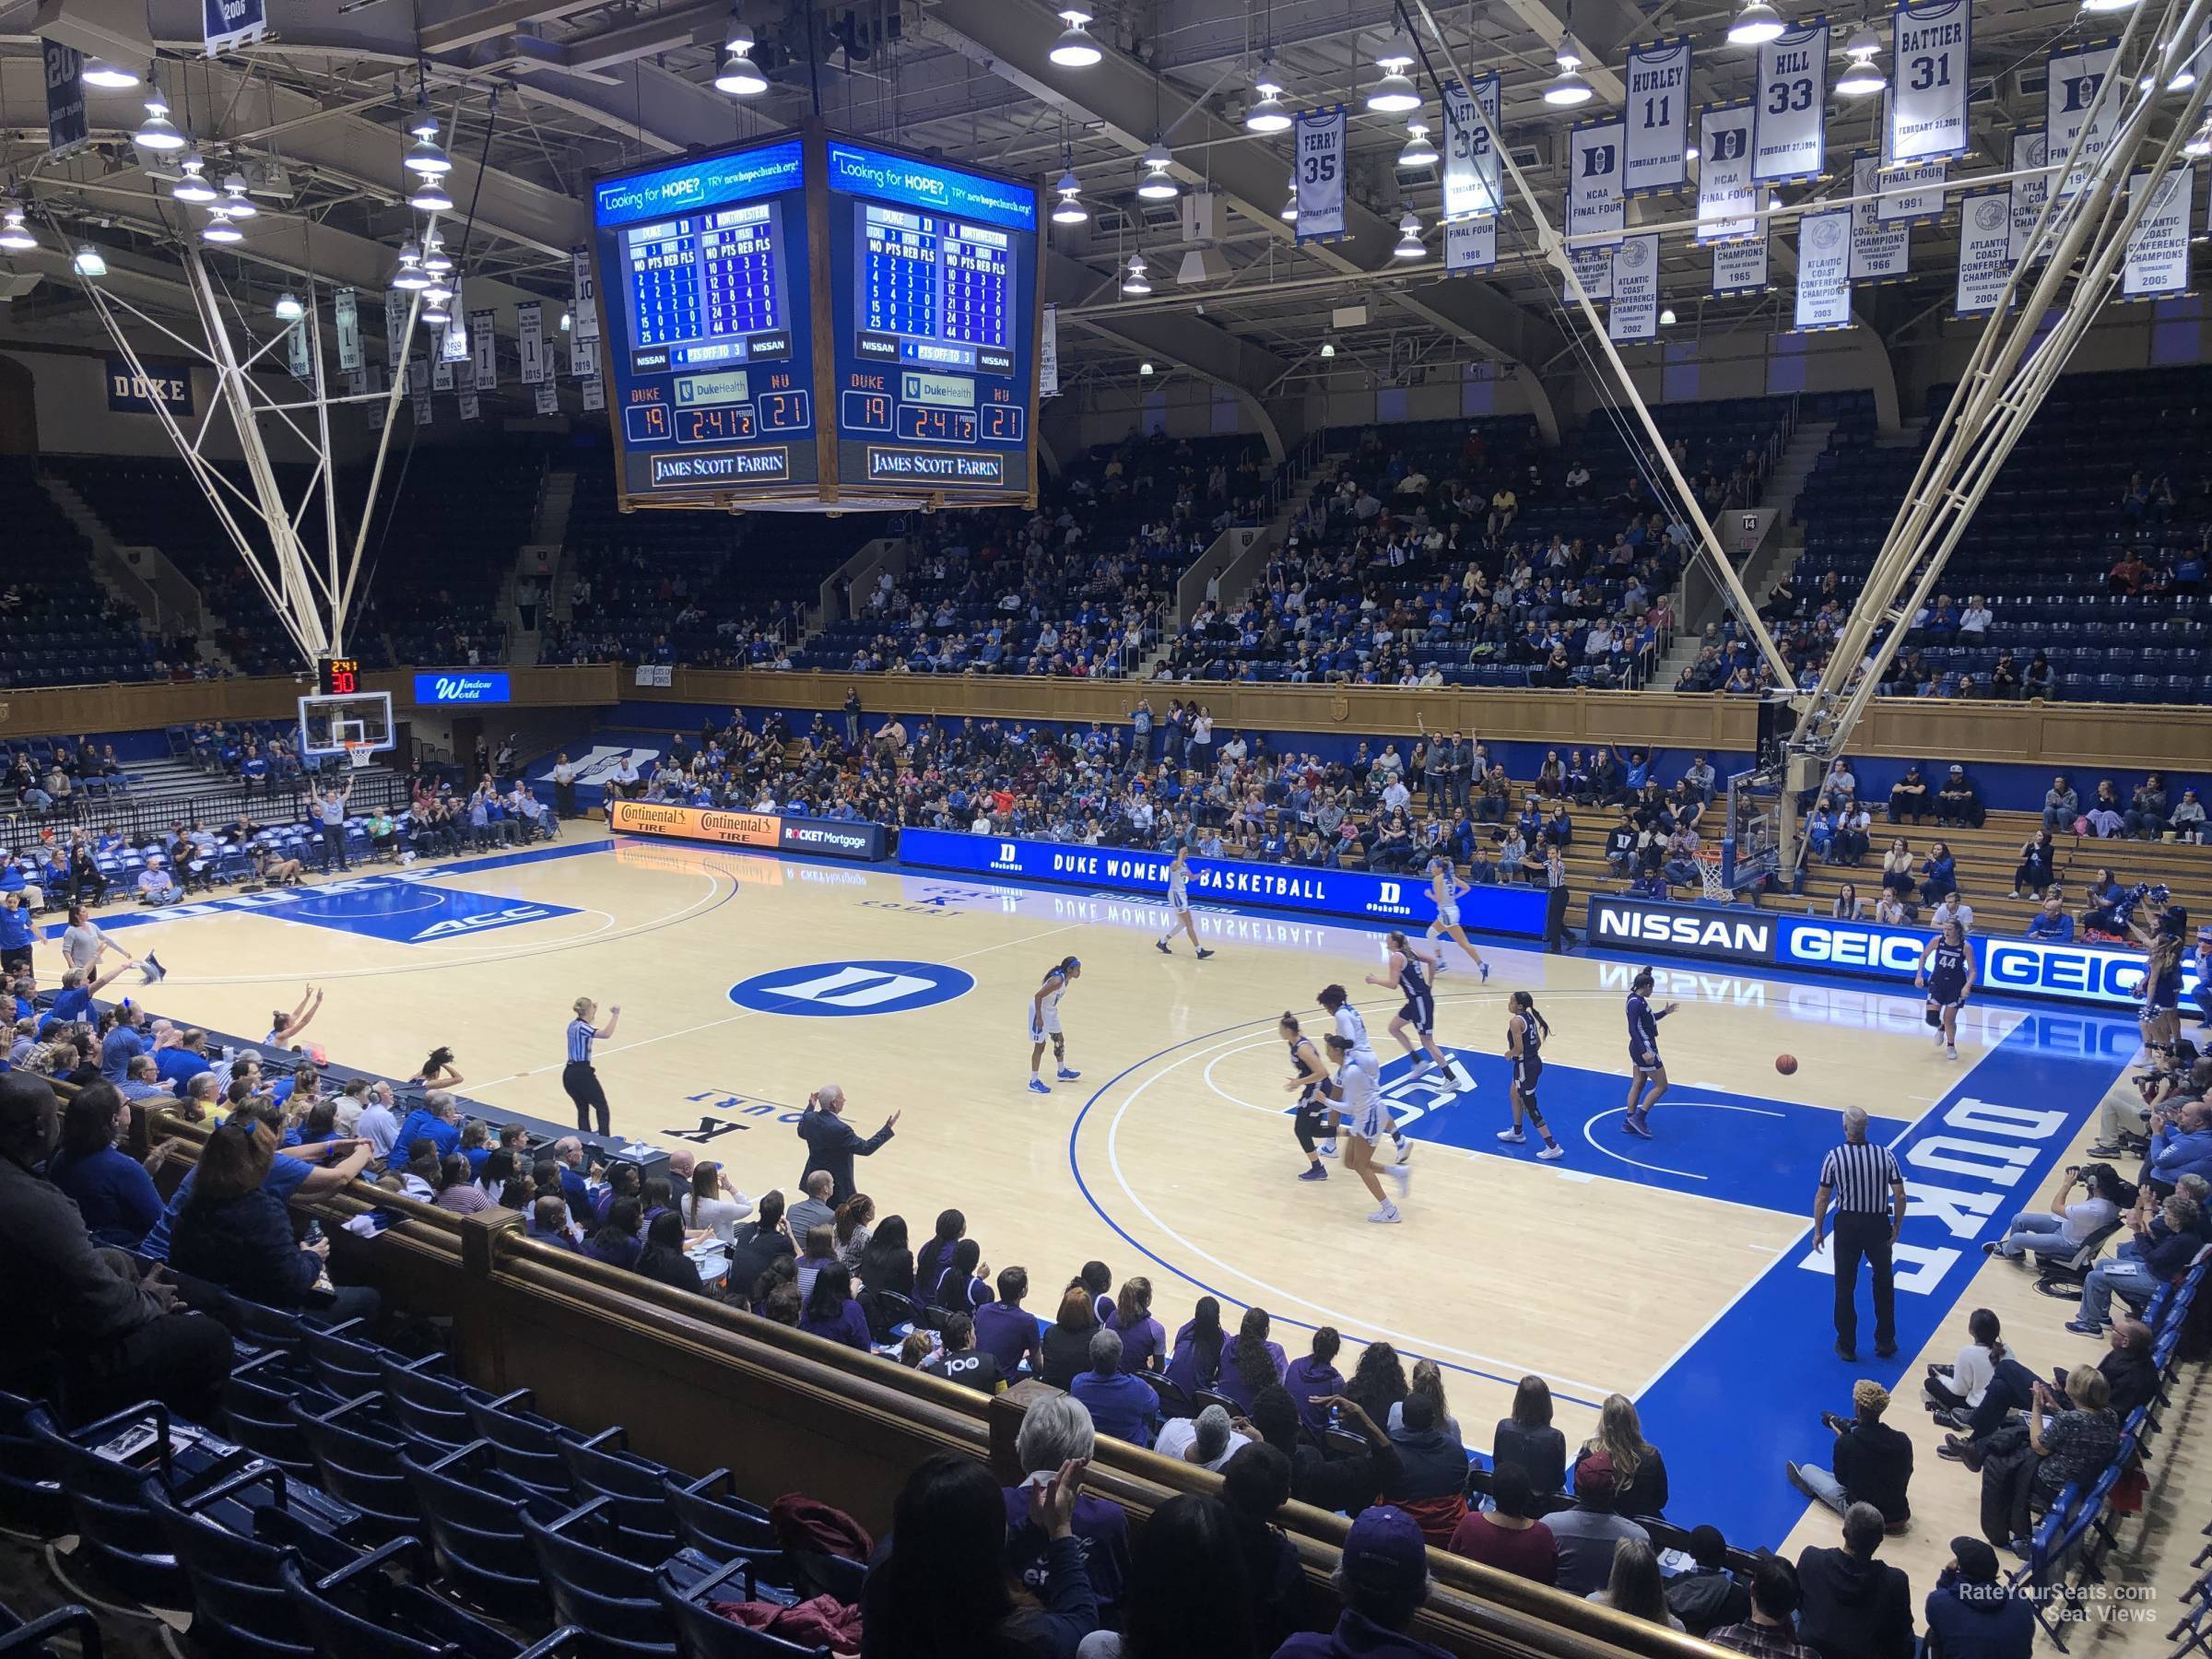 Section 8 at Cameron Indoor Arena - RateYourSeats.com